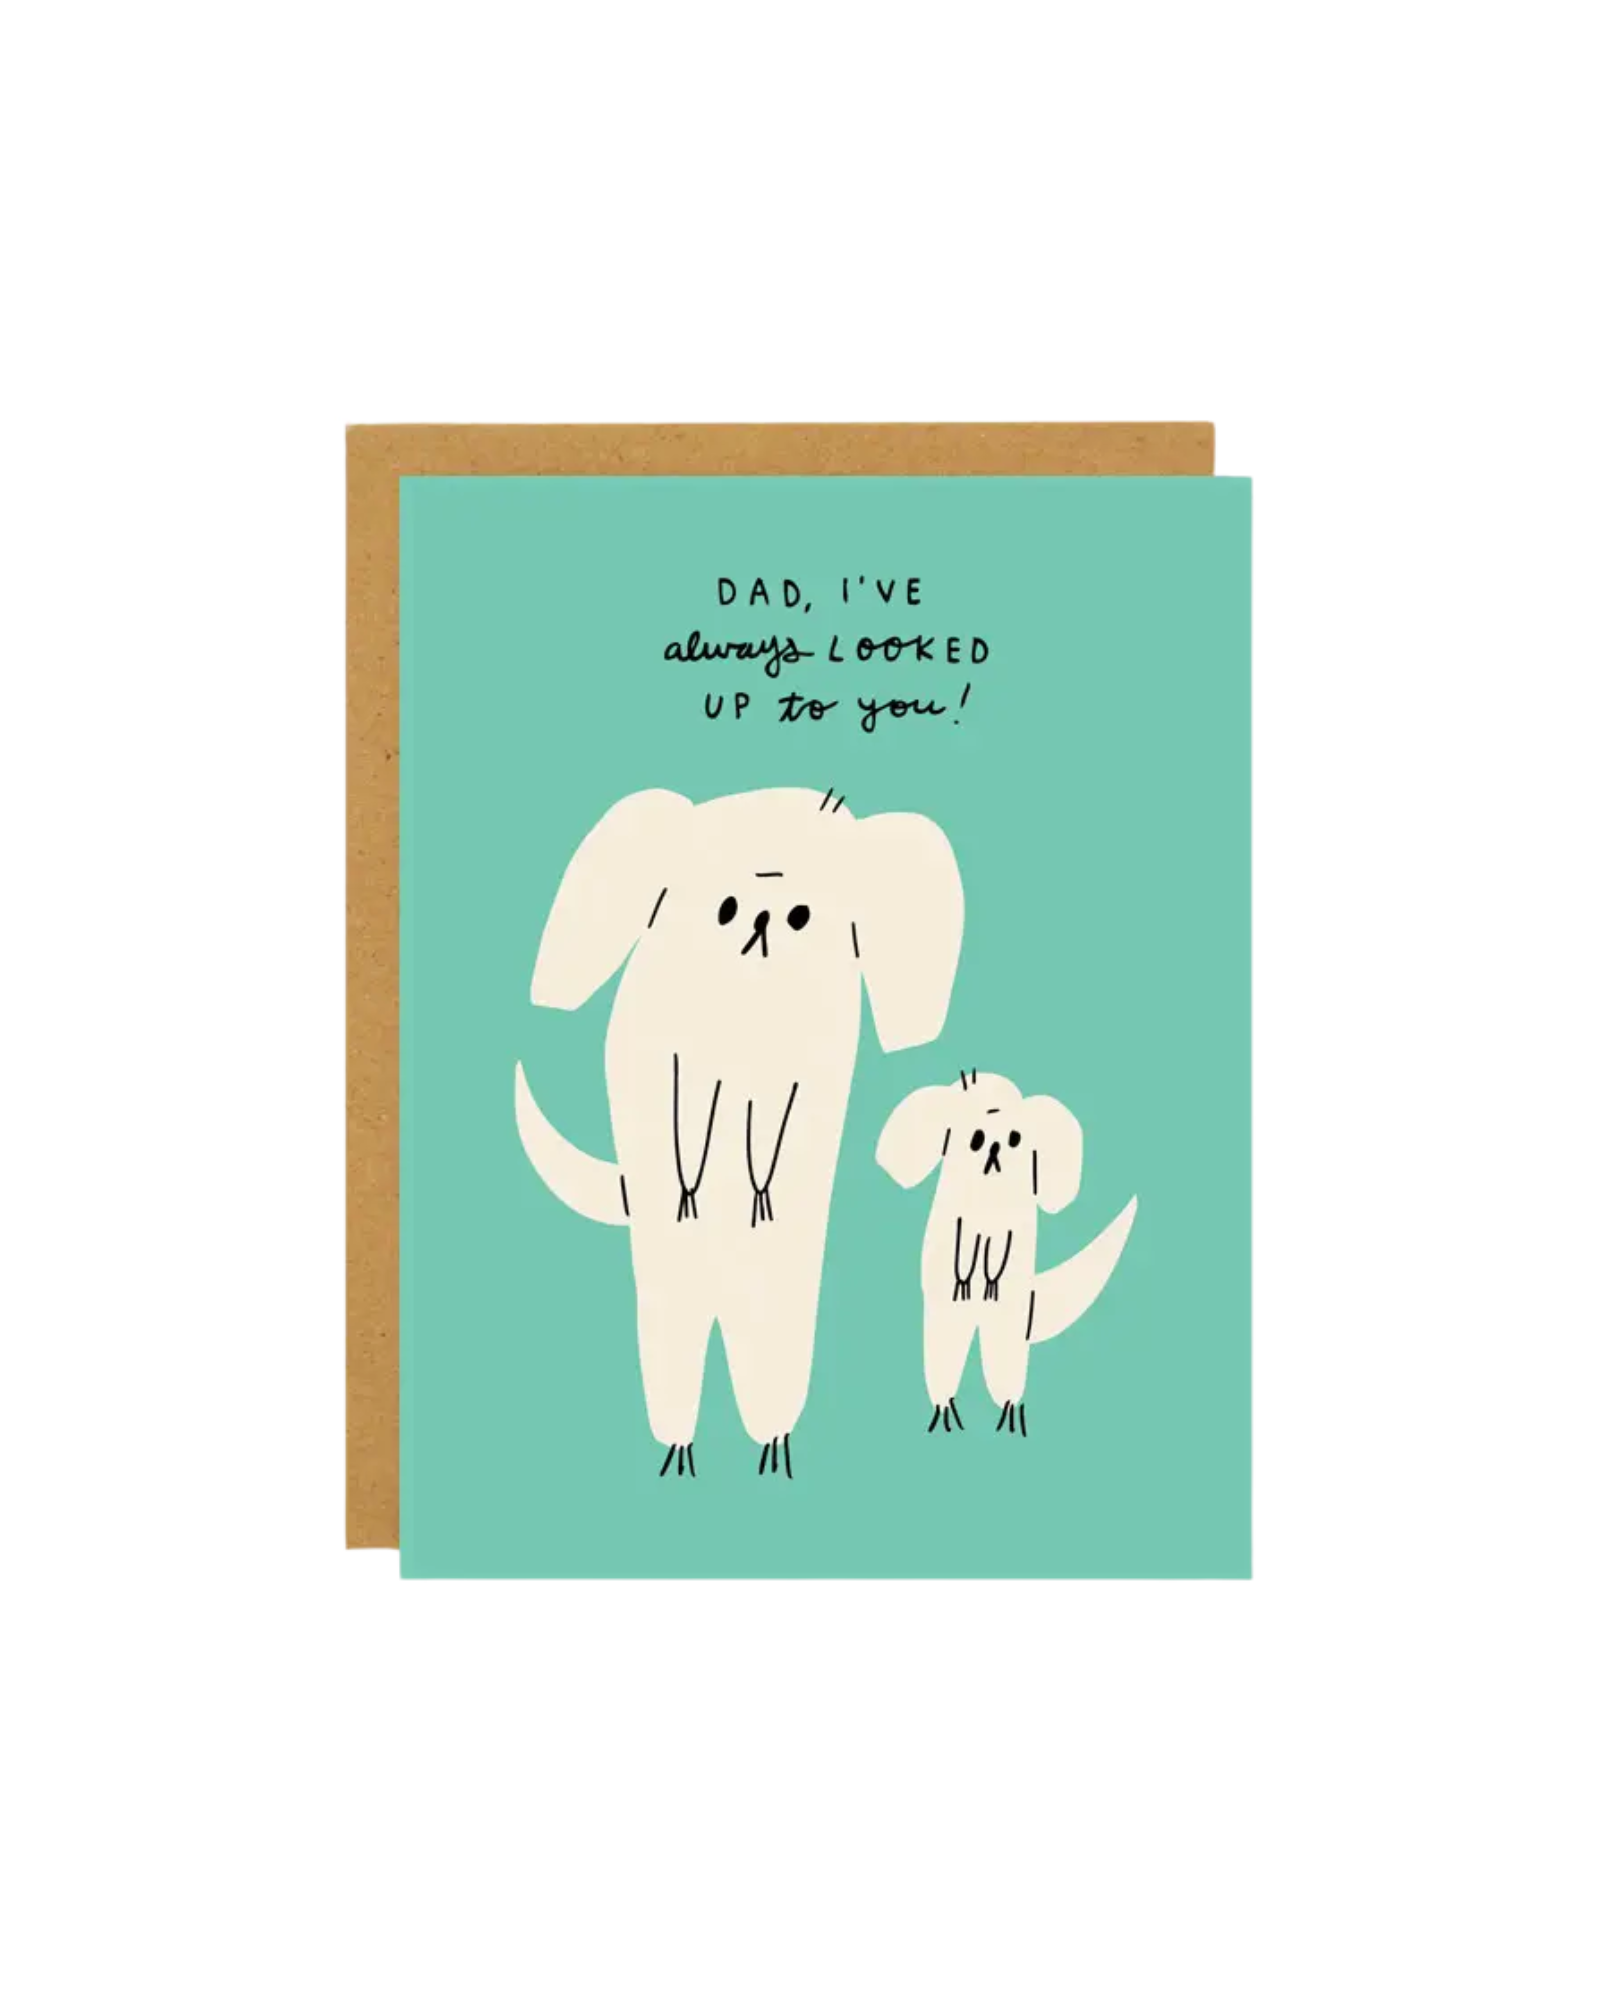 Green card with an illustrated large dog and small dog below the words "dad I've always looked up to you"